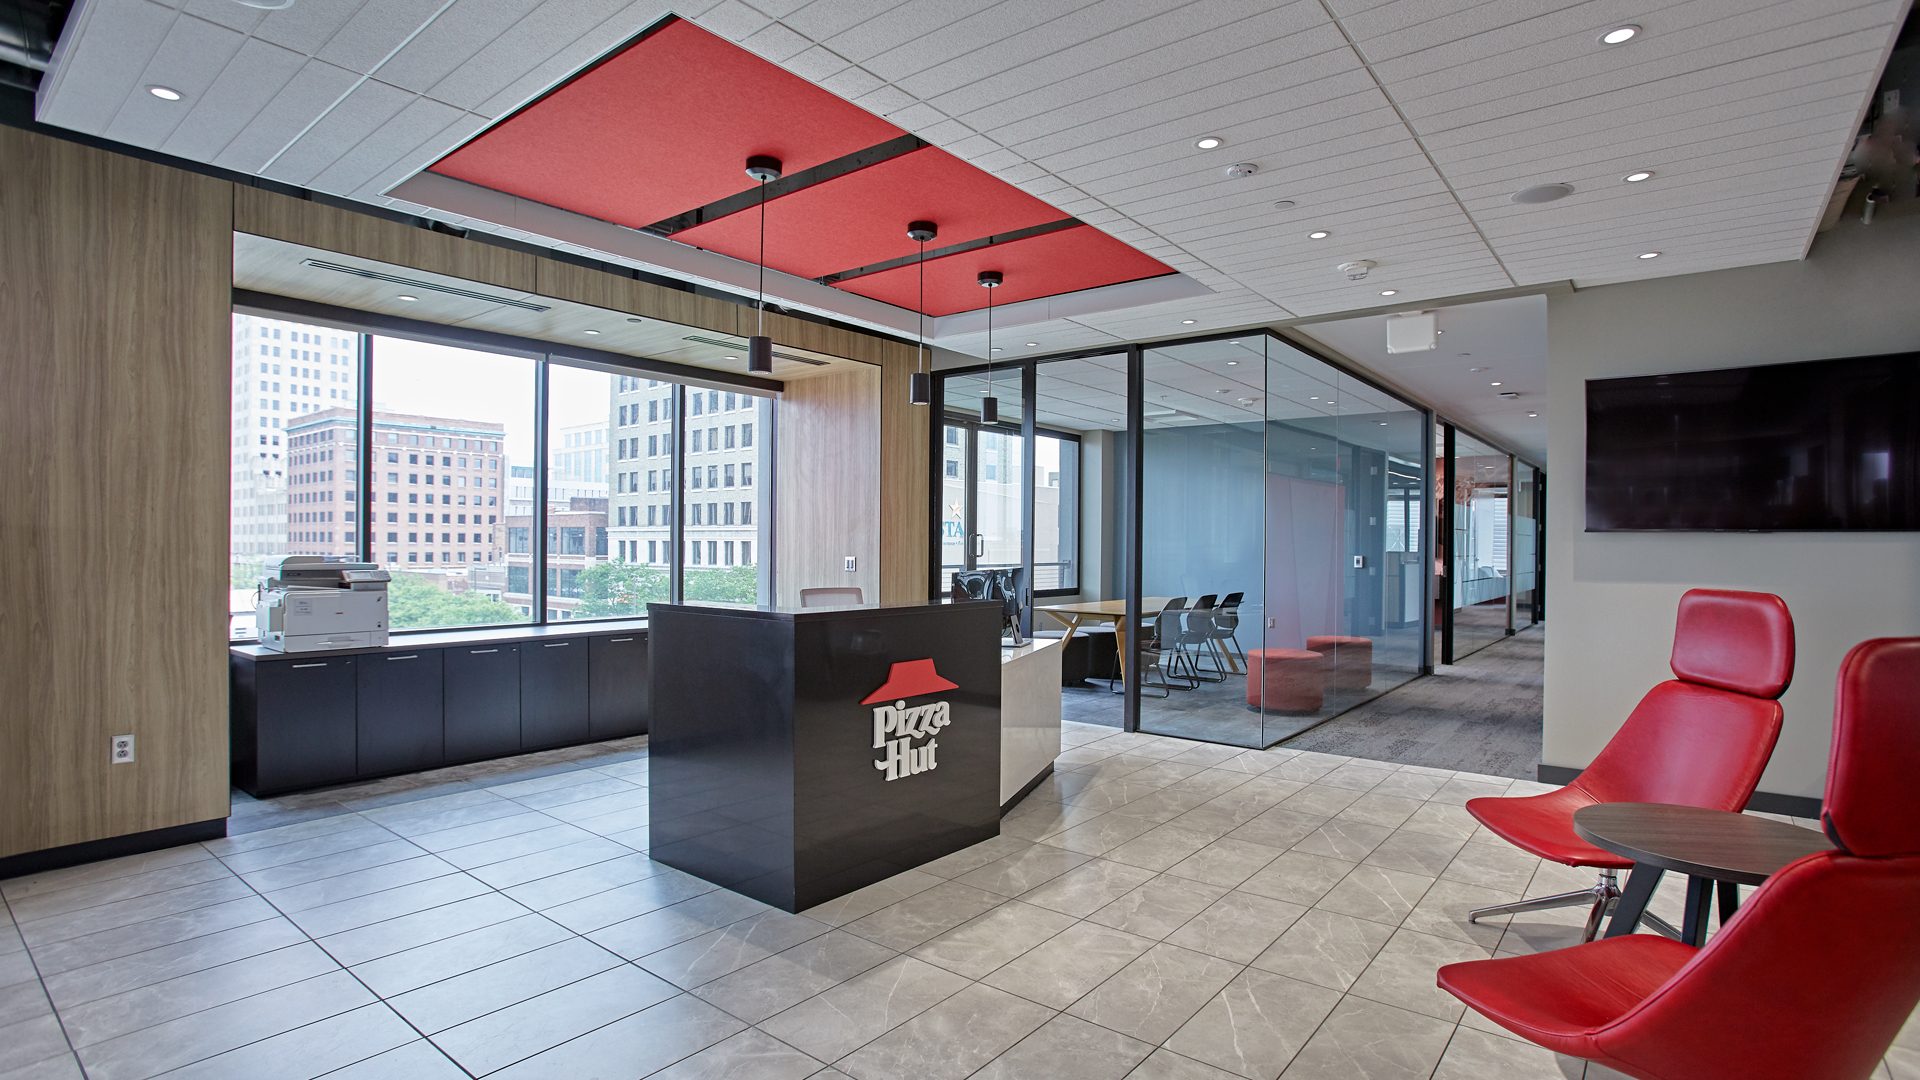 Pizza Hut HQ Reception Desk with Red ceiling detail